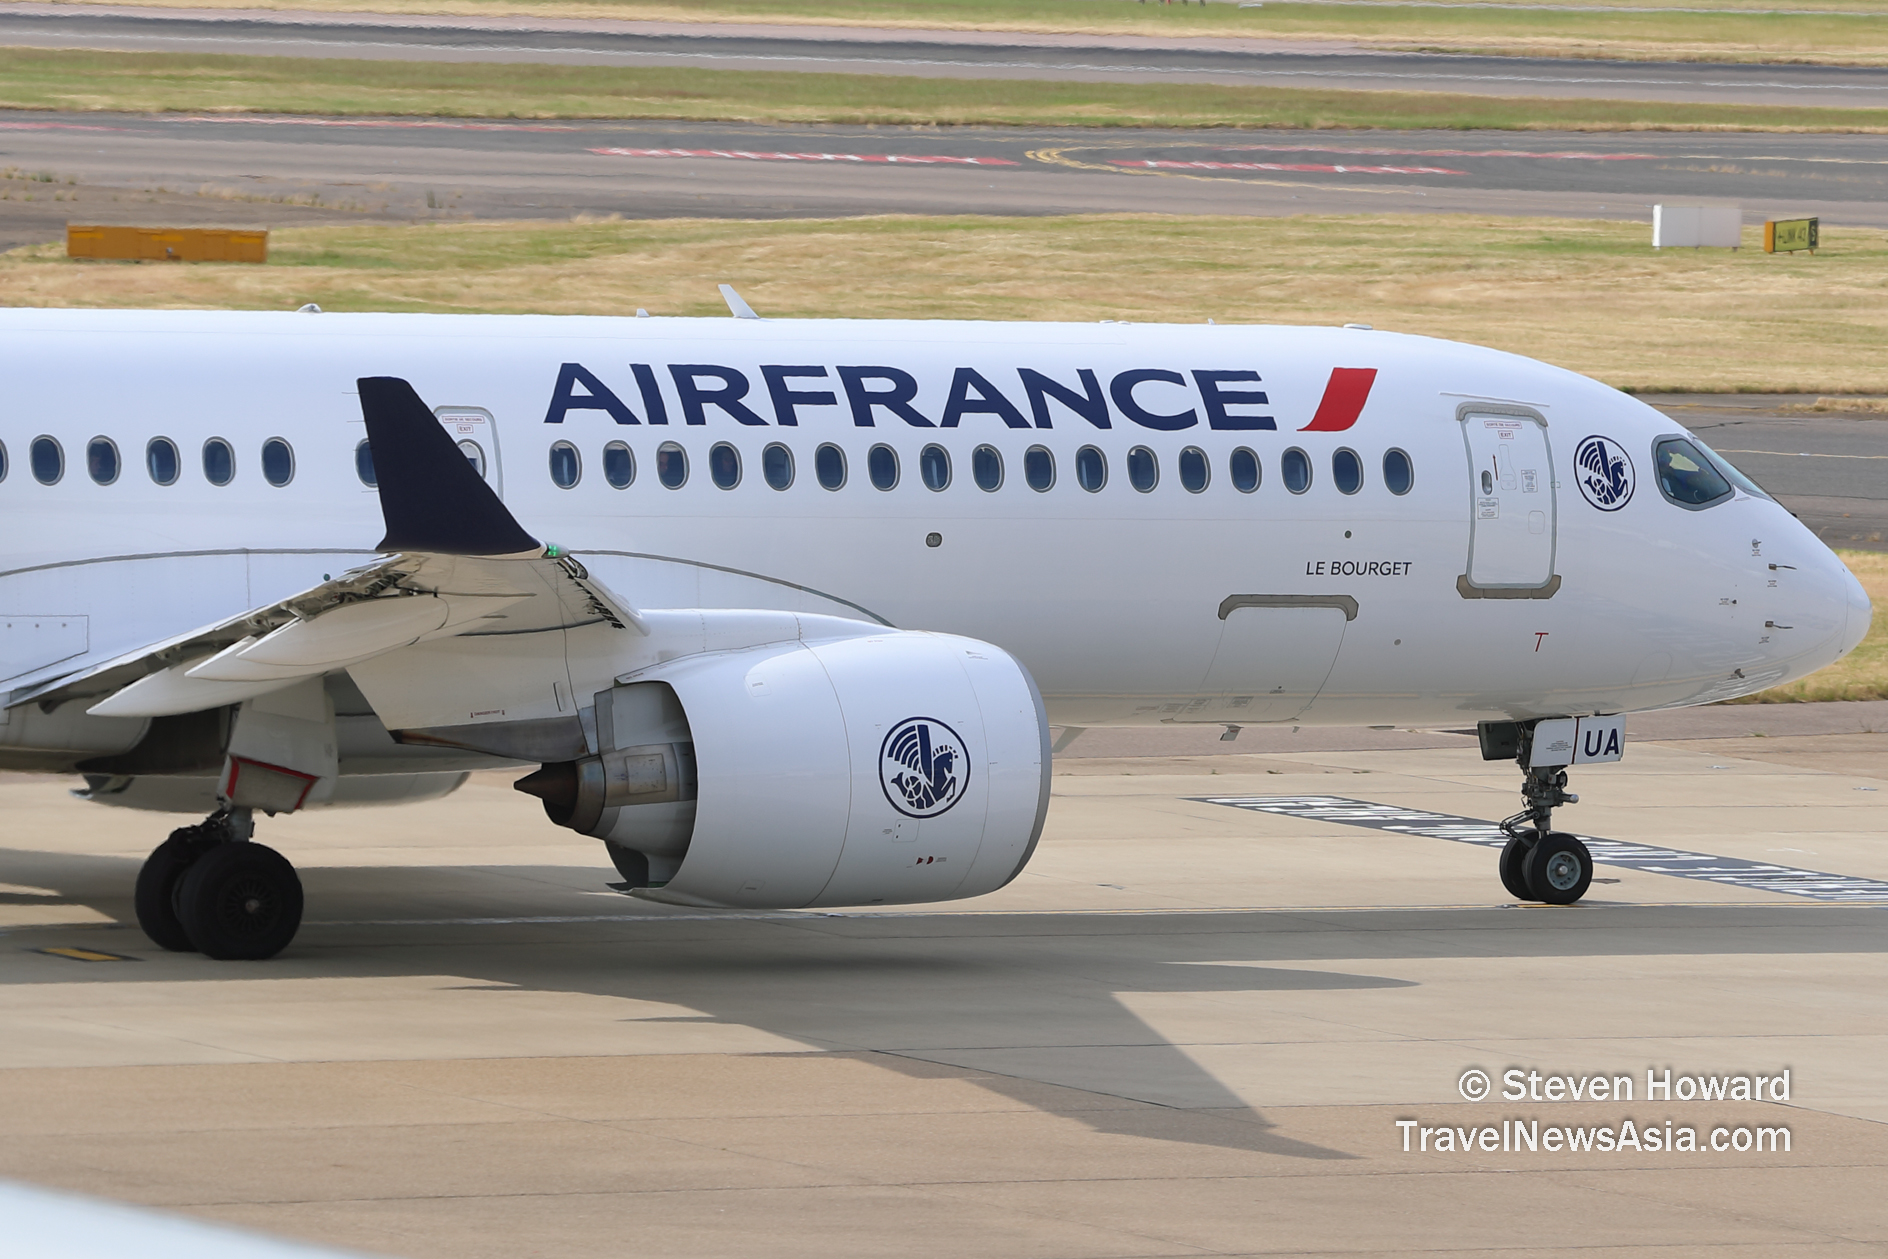 Air France A220-300 reg: F-HZUA. Picture by Steven Howard of TravelNewsAsia.com Click to enlarge.